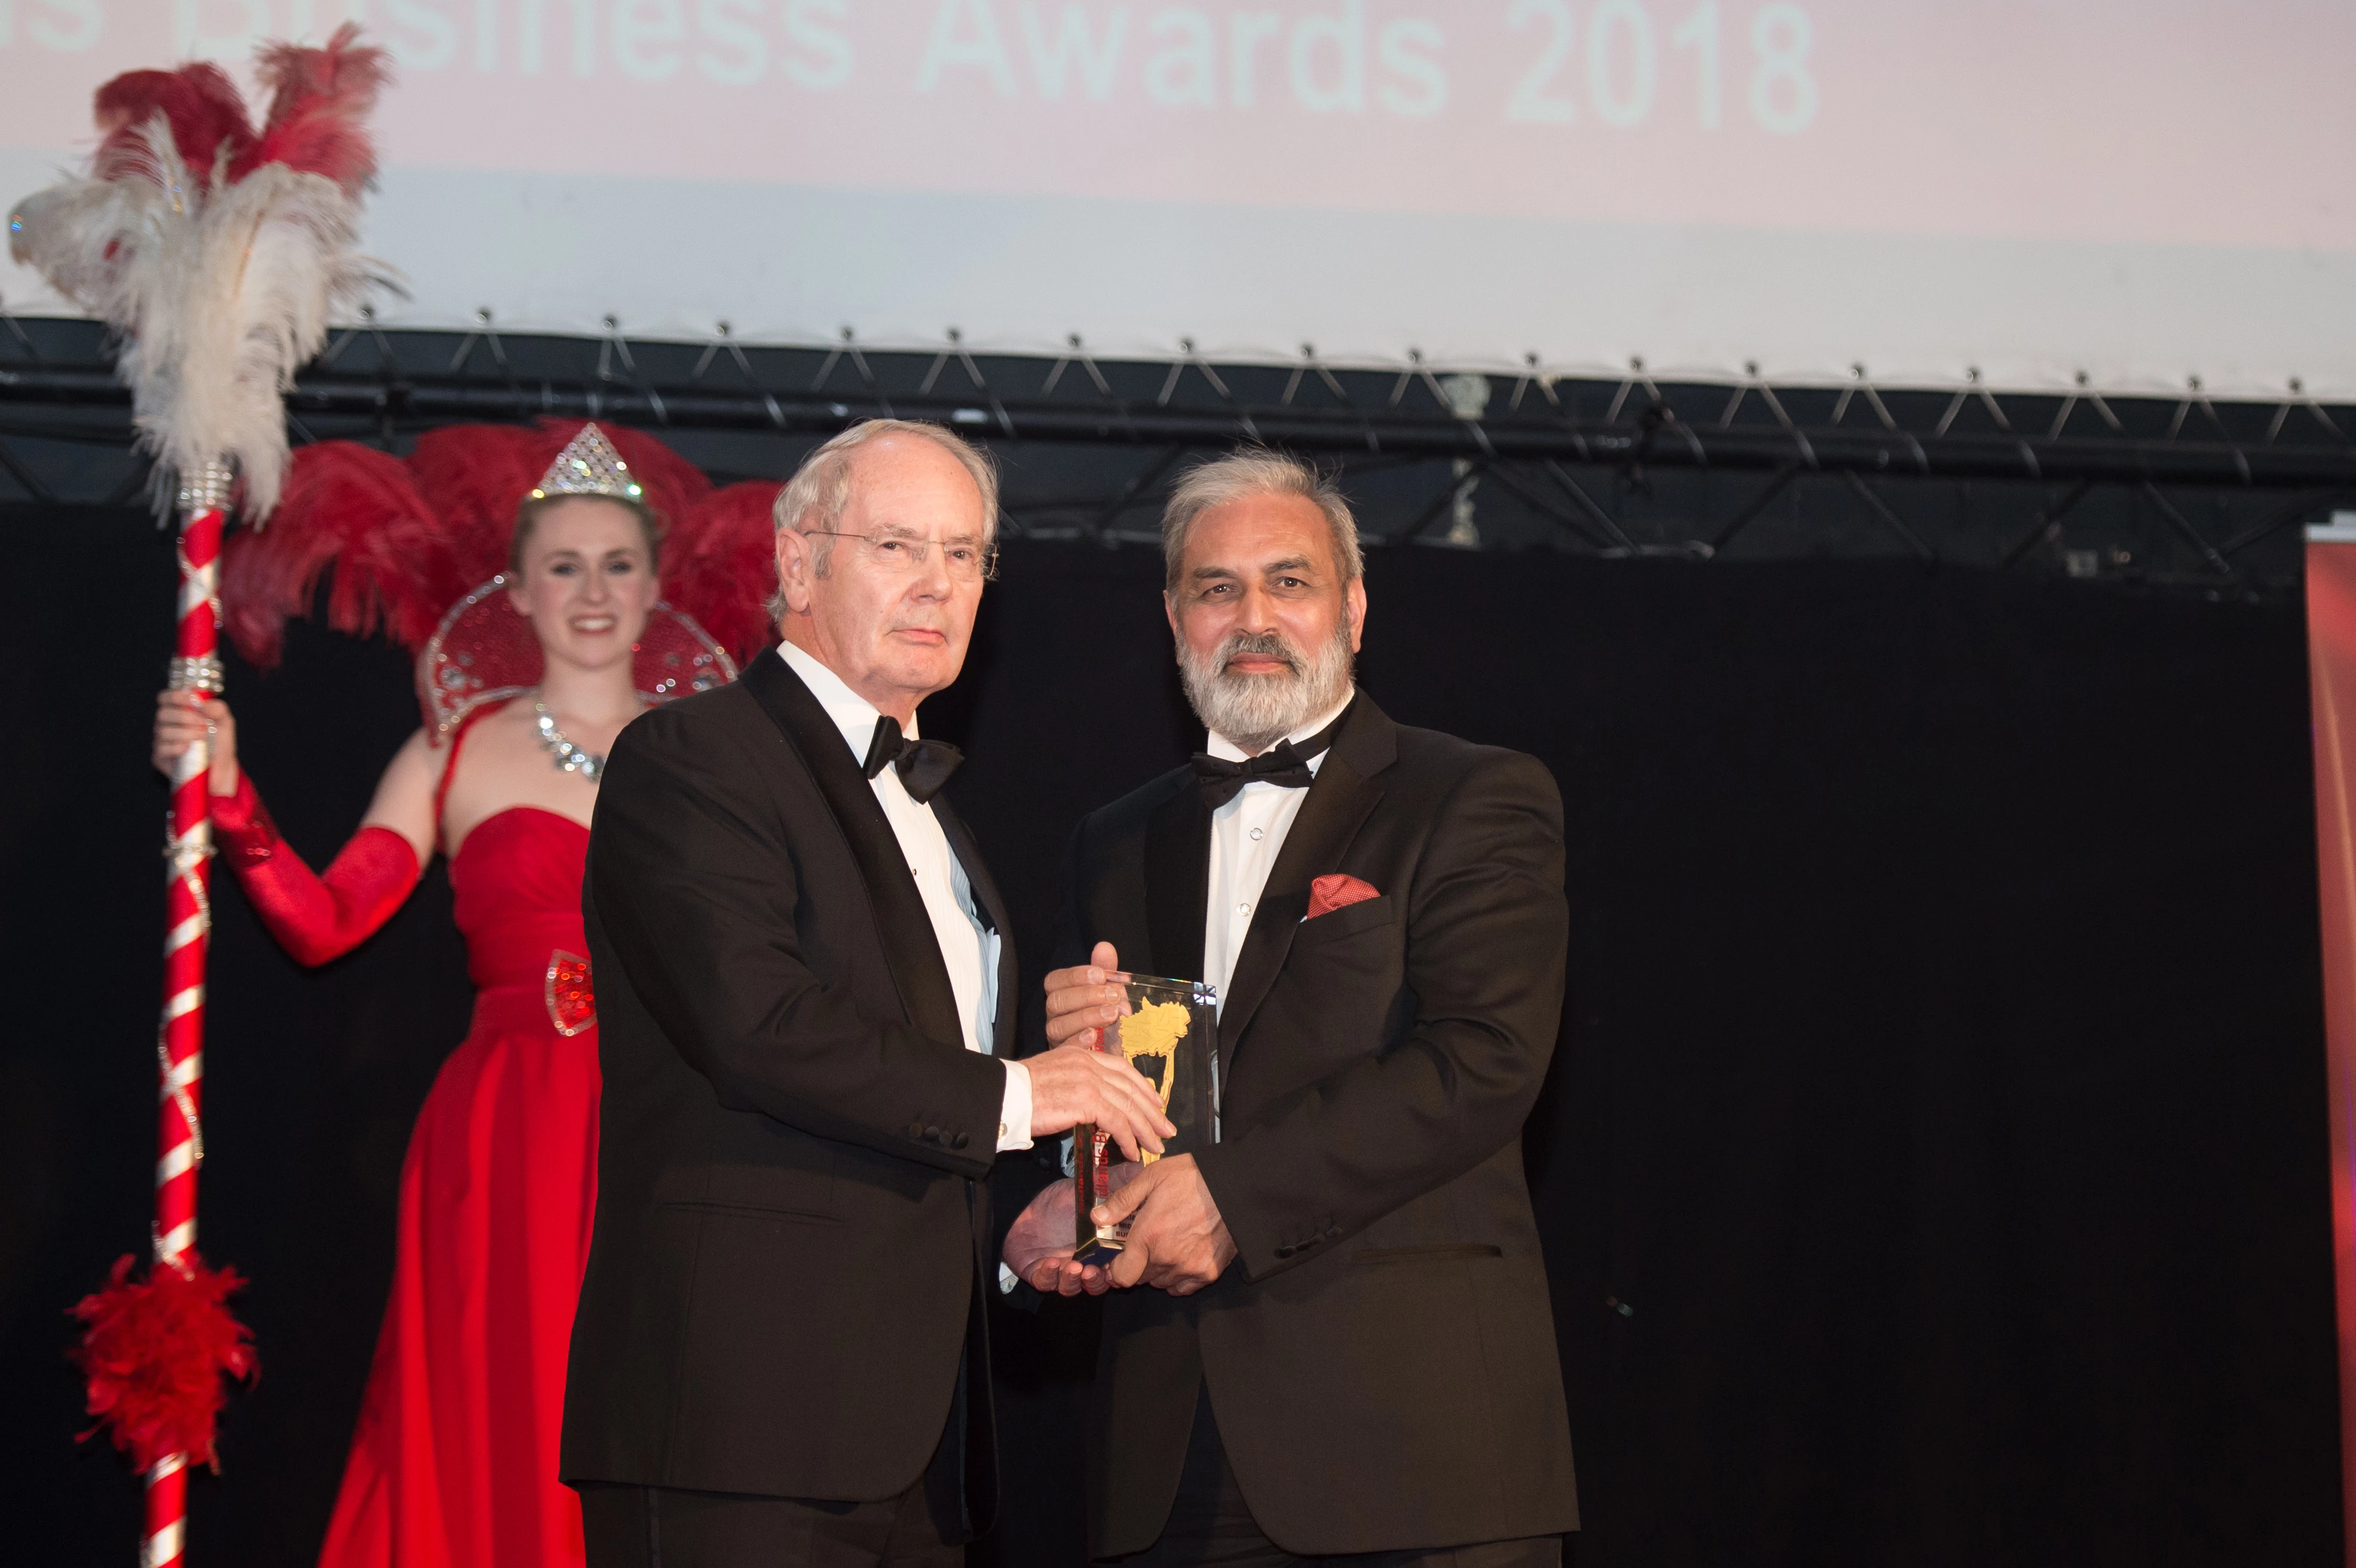 Sir Peter Rigby is presented with the Lifetime Contribution to Midlands Business Award by Harj Sandher from the Midlands Business Awards